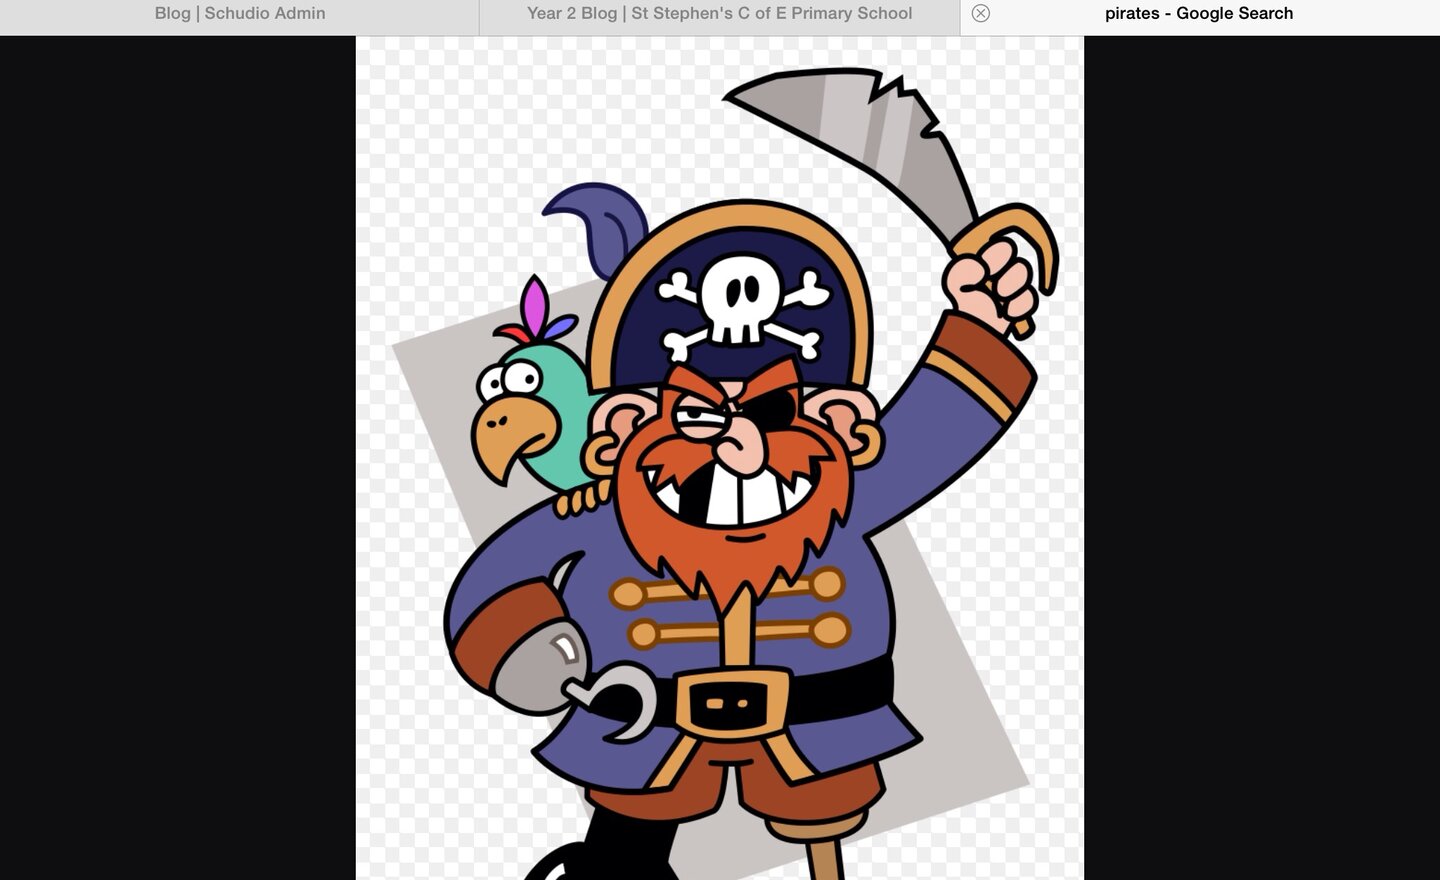 Image of Pirate themed day Friday 21st October